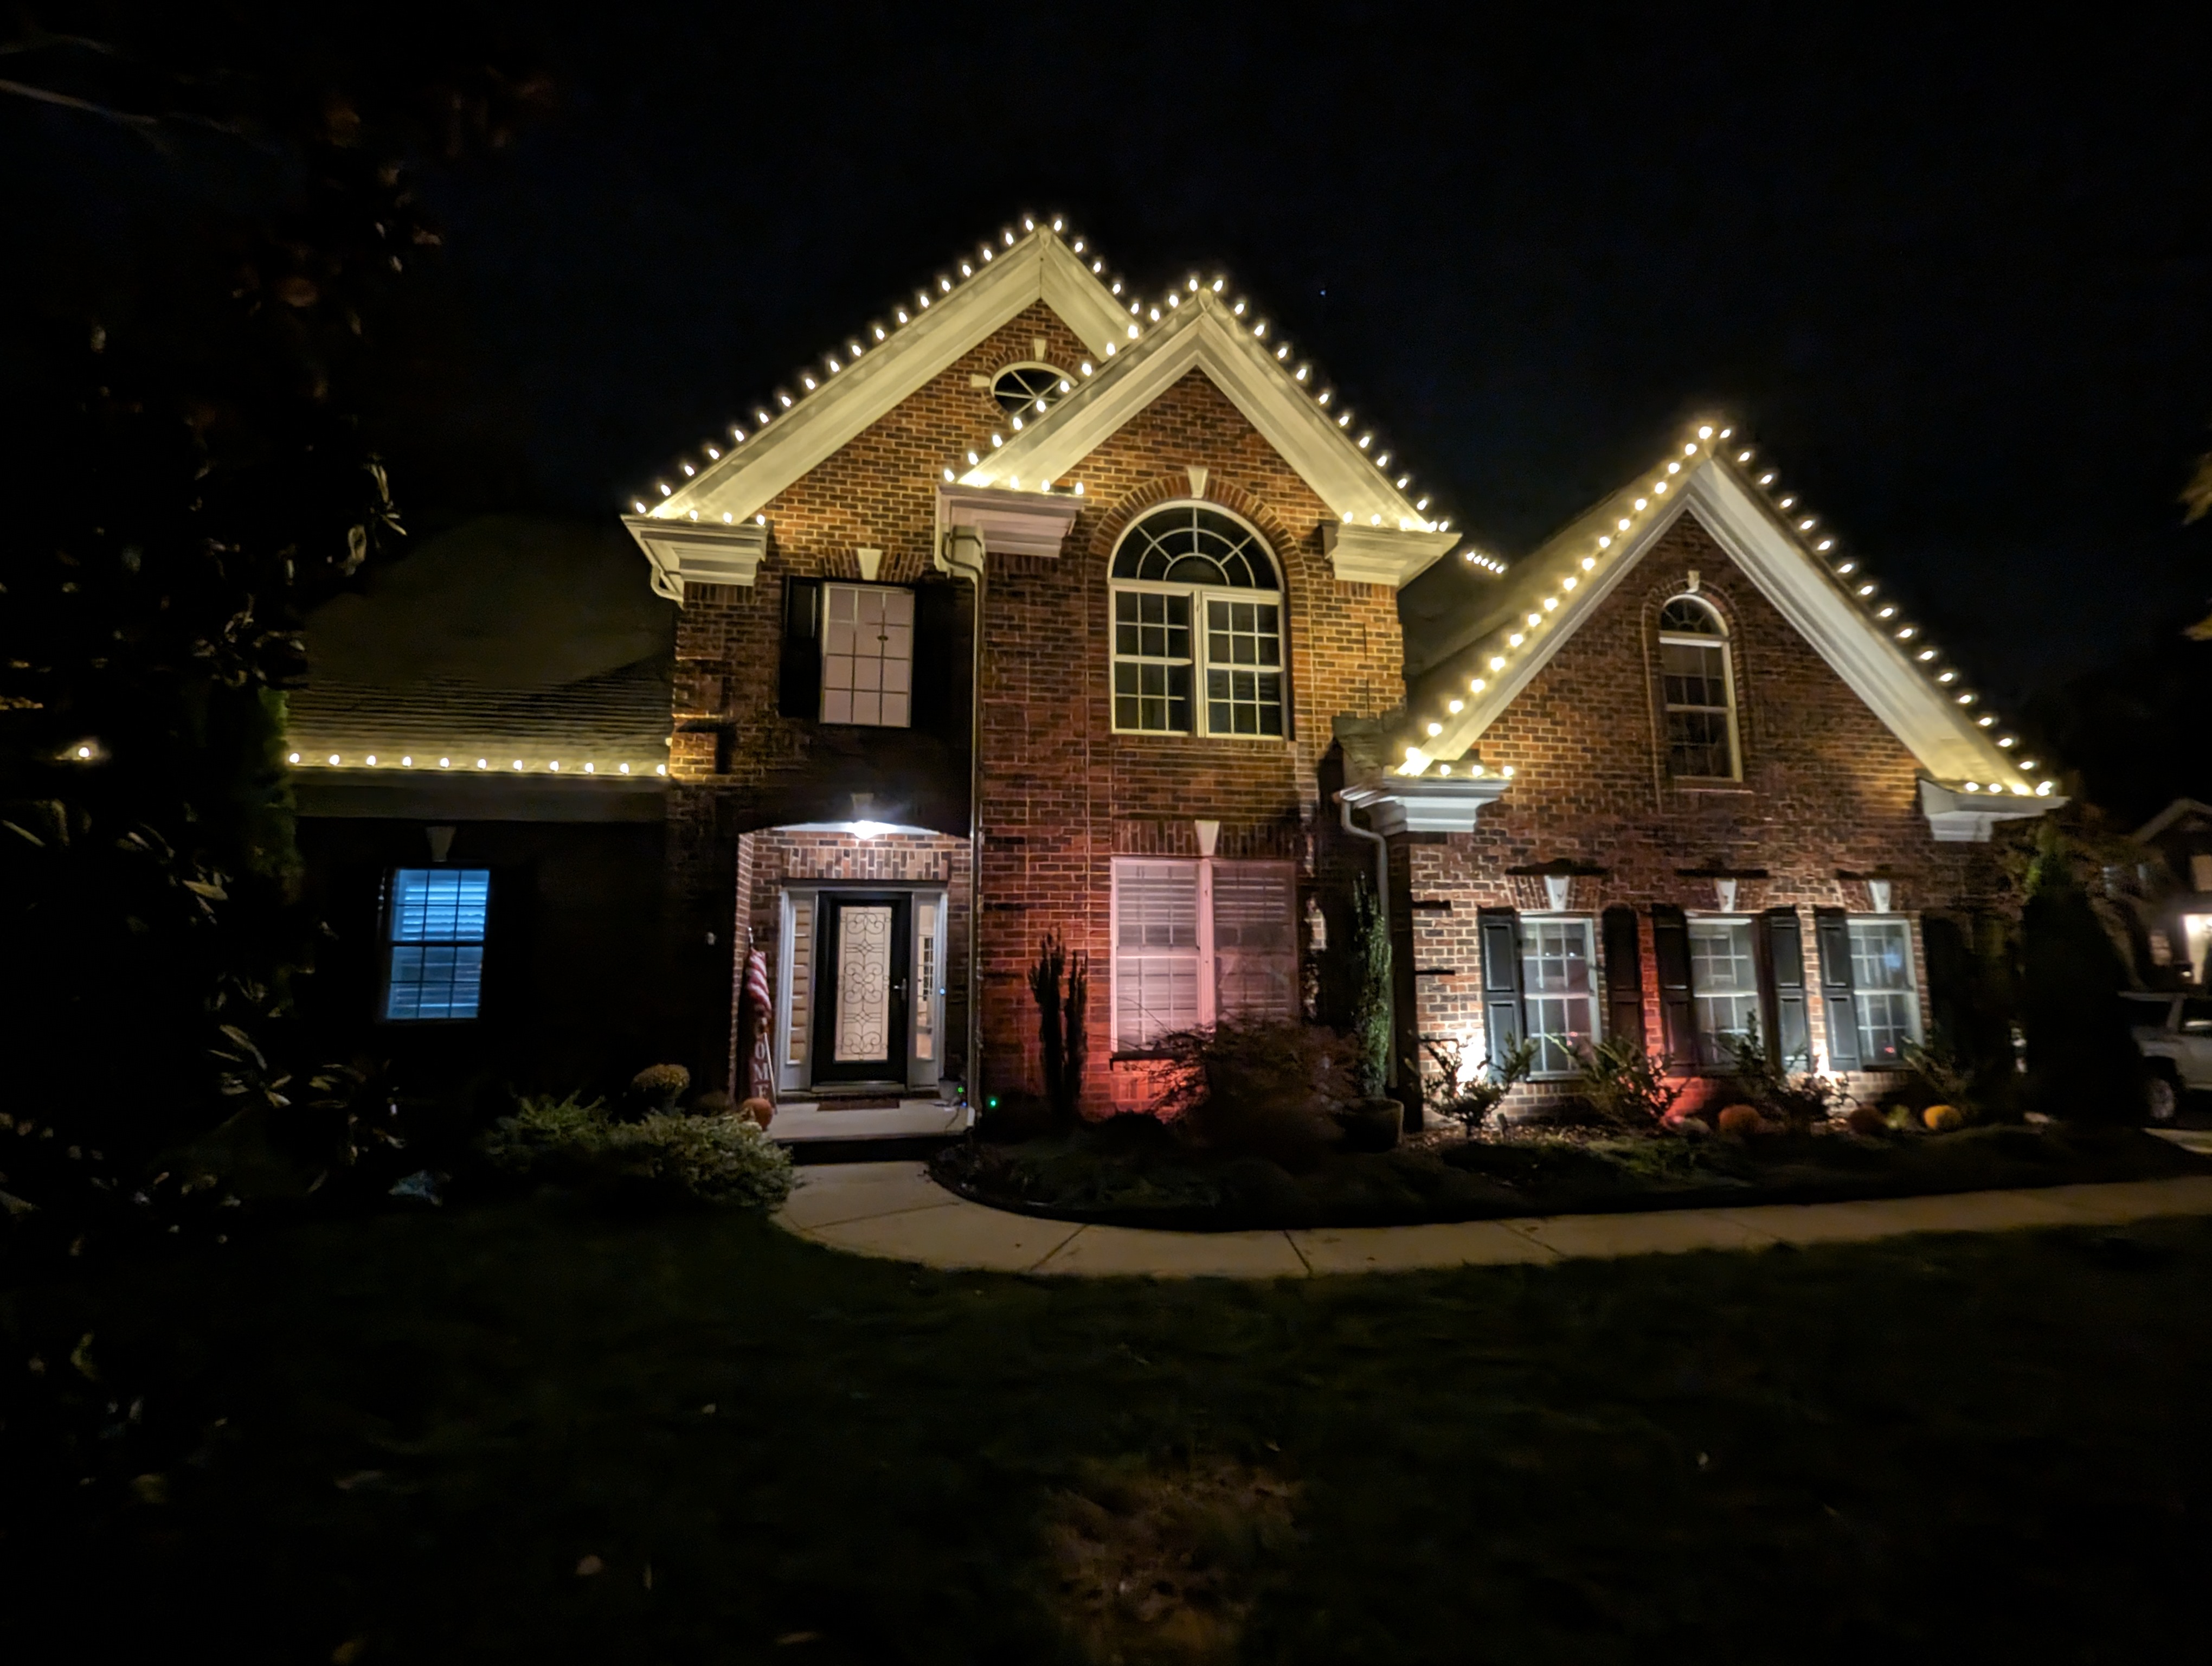 Magical Moments Unveiled in Birkdale - Another Huntersville, NC Christmas Light Installation